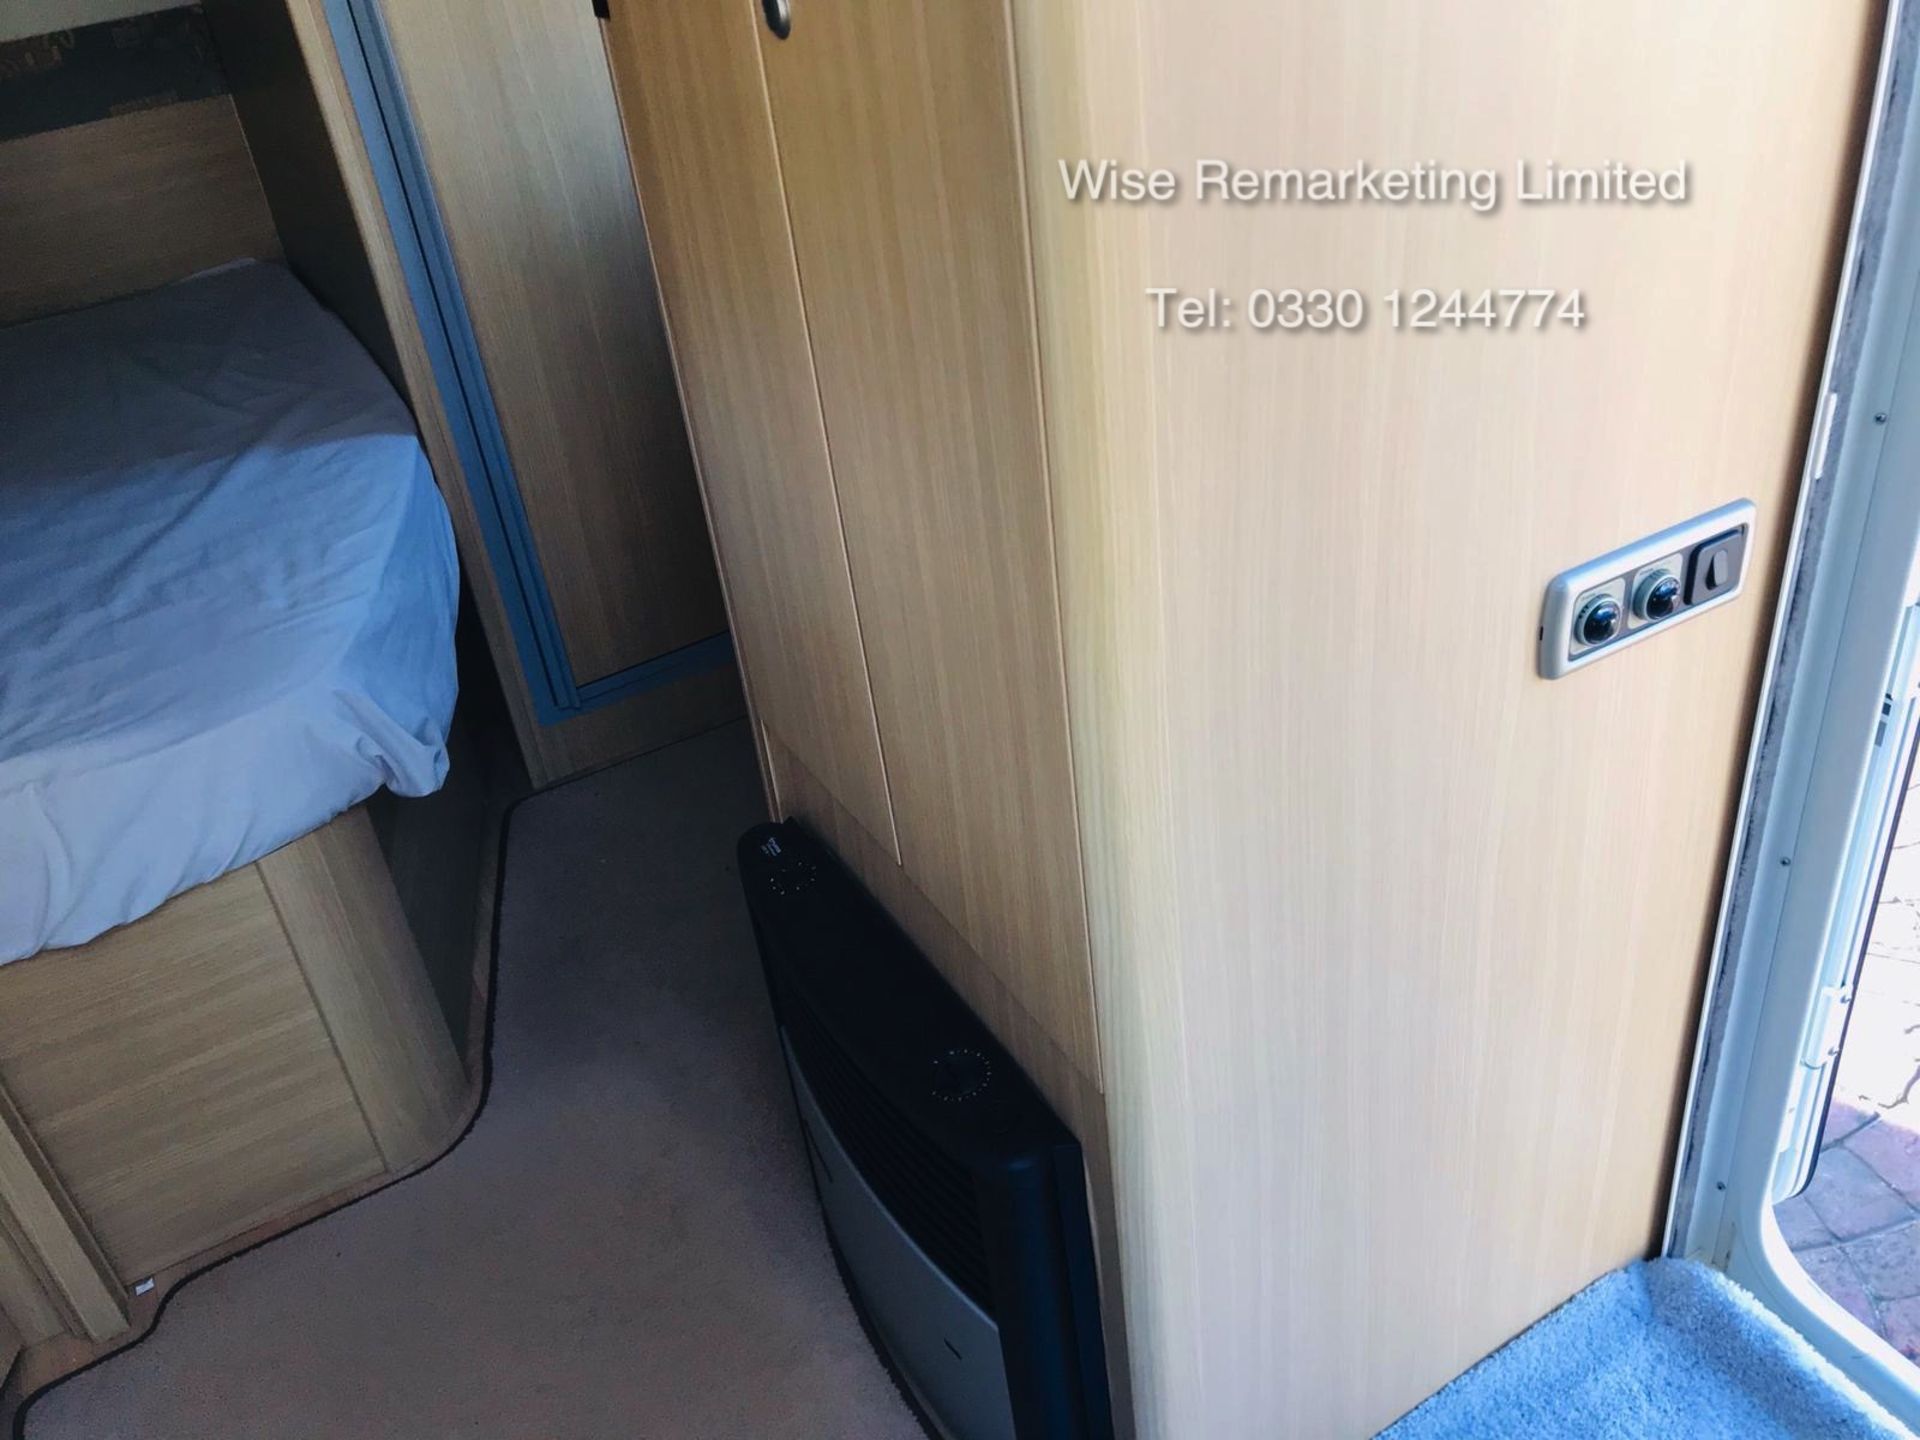 (RESERVE MET) Swift Abbey Freestyle 480 (4 Berth) Caravan - 2008 Model - 1 Former Keeper From New - Image 22 of 32